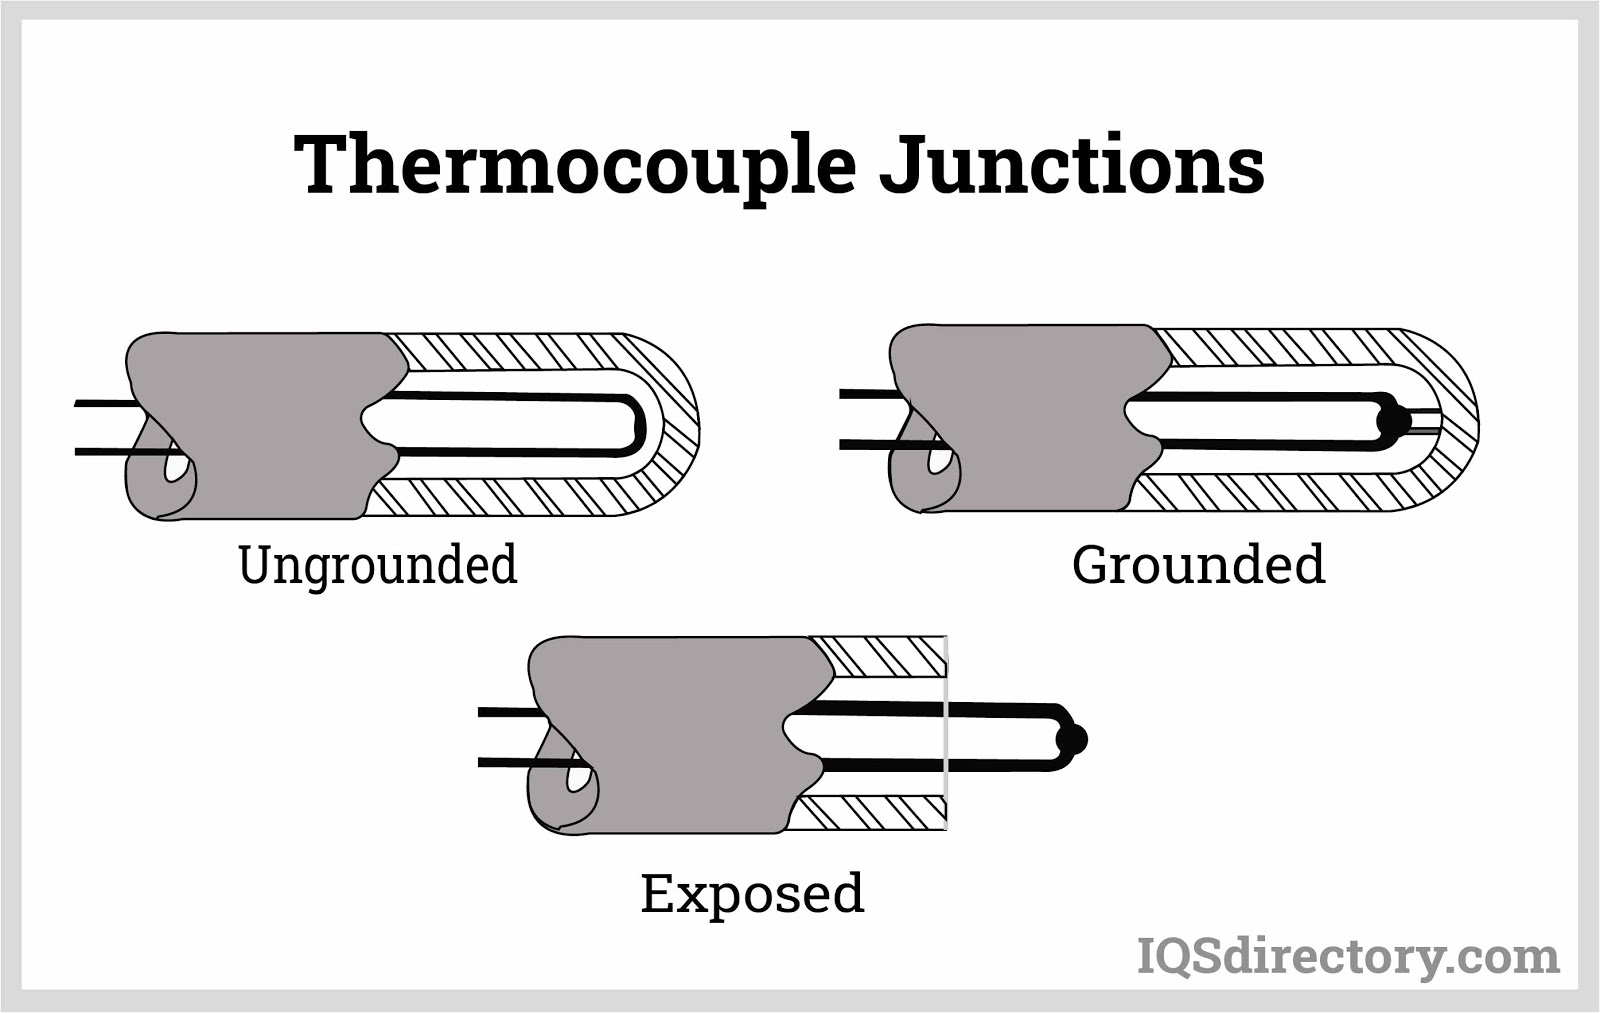 Thermocouple Junctions